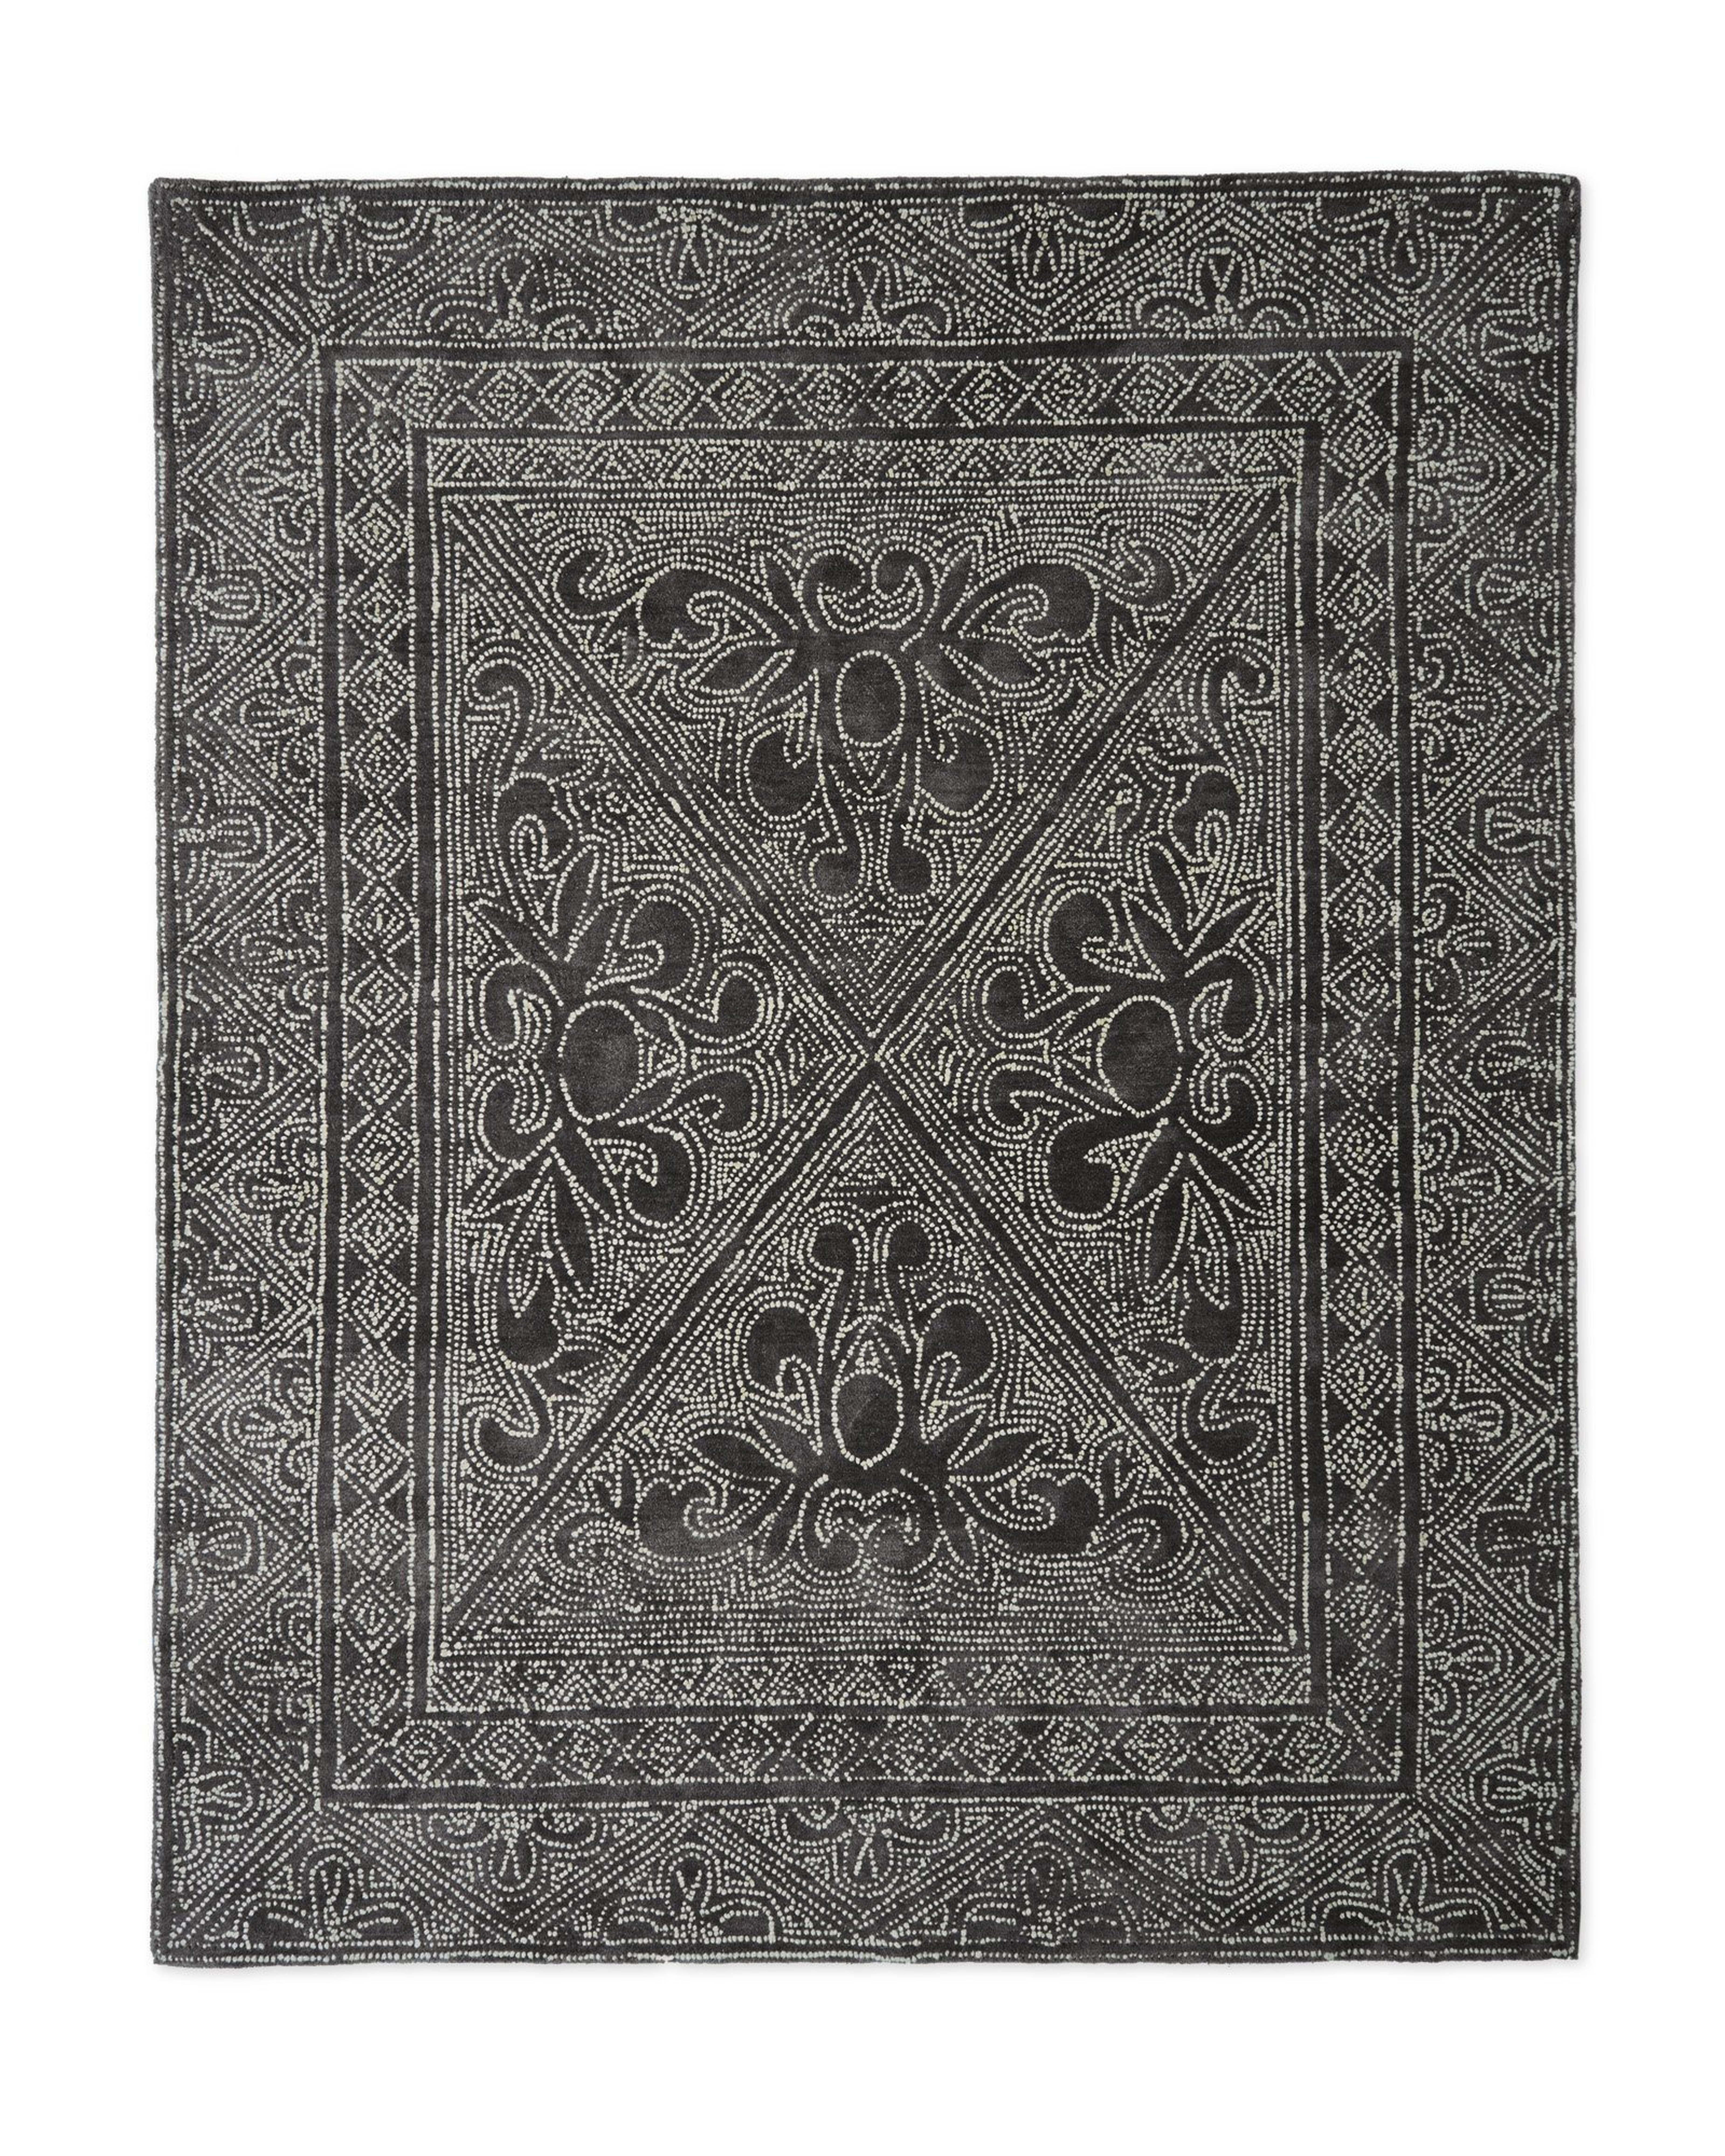 Mirabelle Rug, Pewter - 9'x12' - Serena and Lily